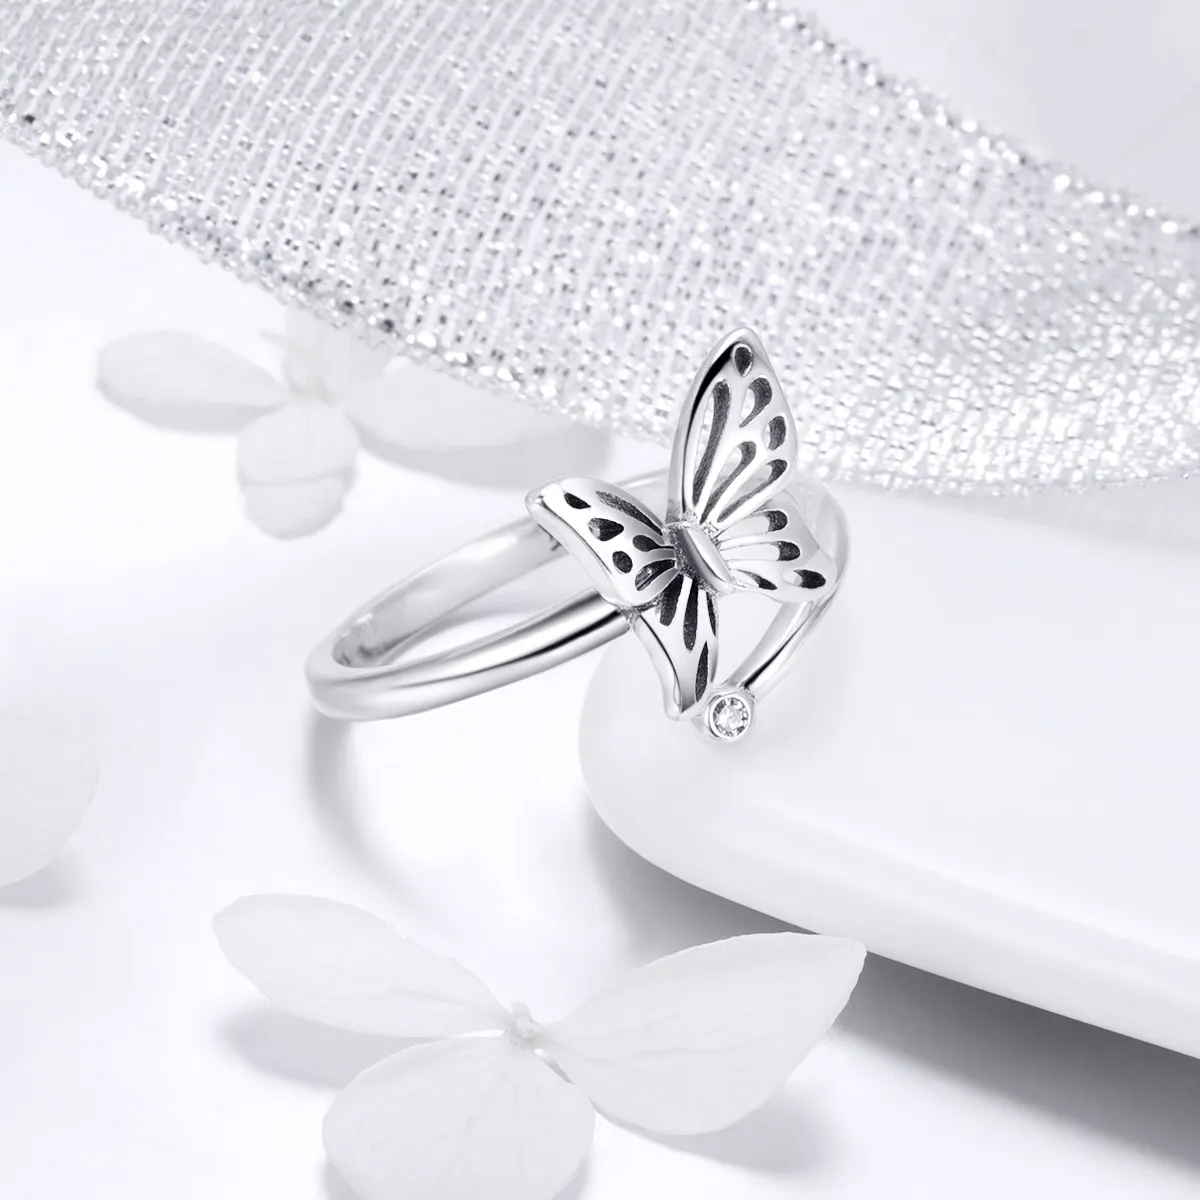 Pandora Style Silver Butterfly Dream Ring - SCR448